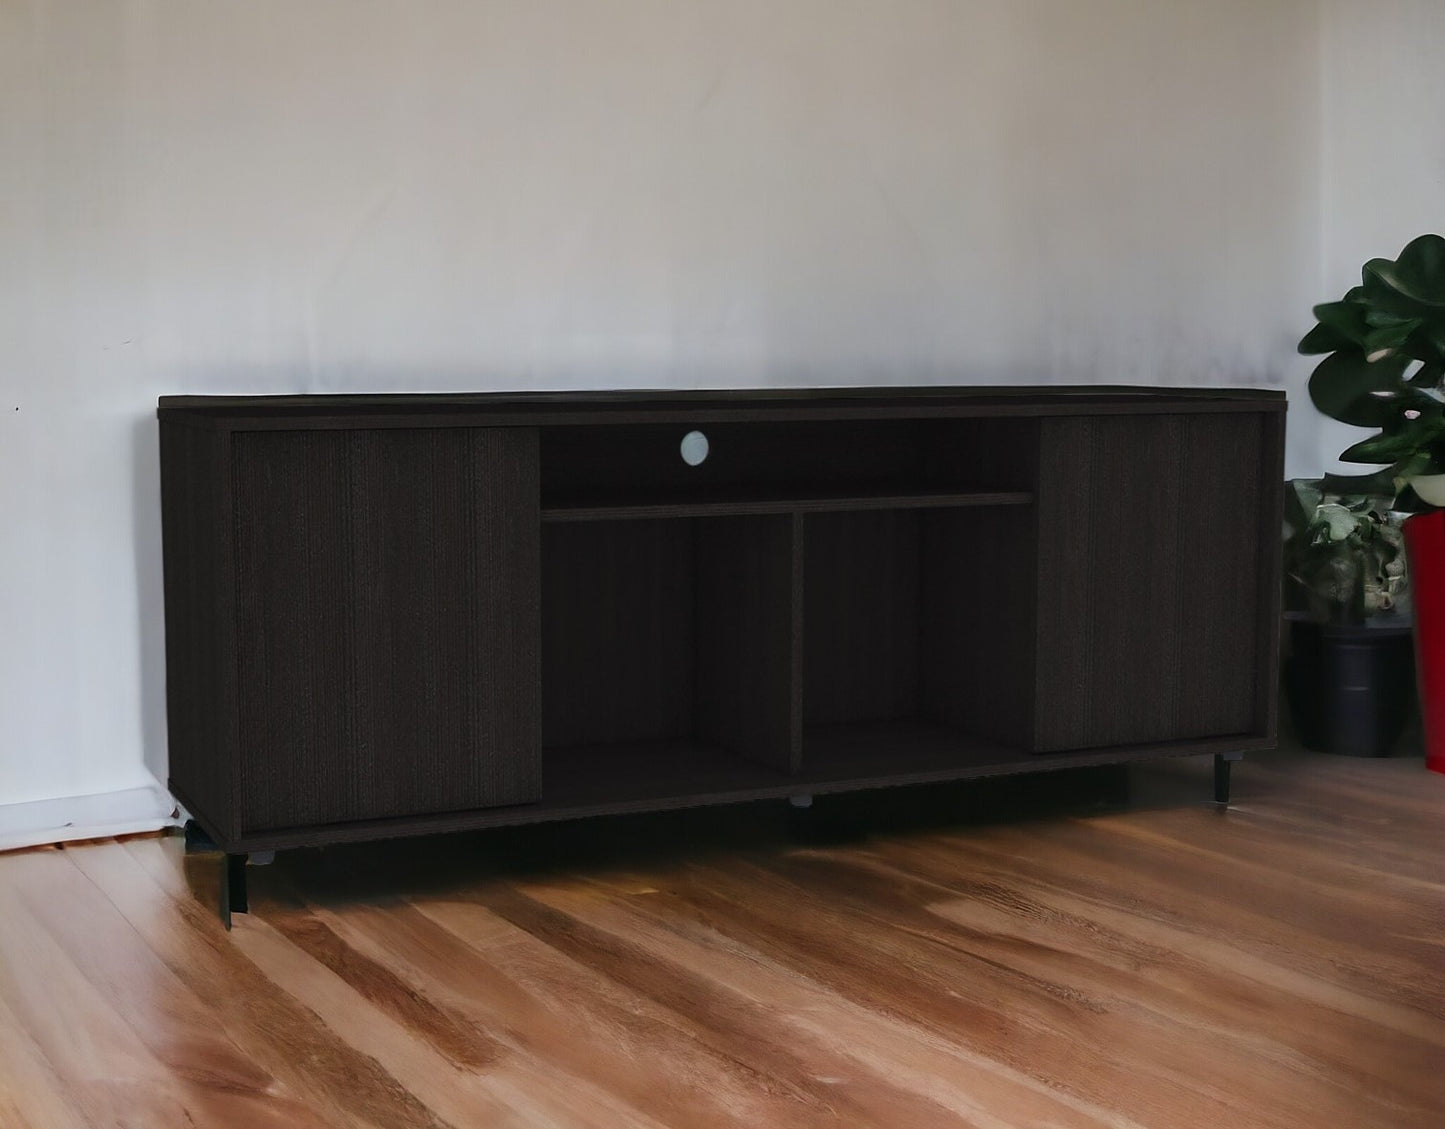 59" Brown and Black Cabinet Enclosed Storage TV Stand